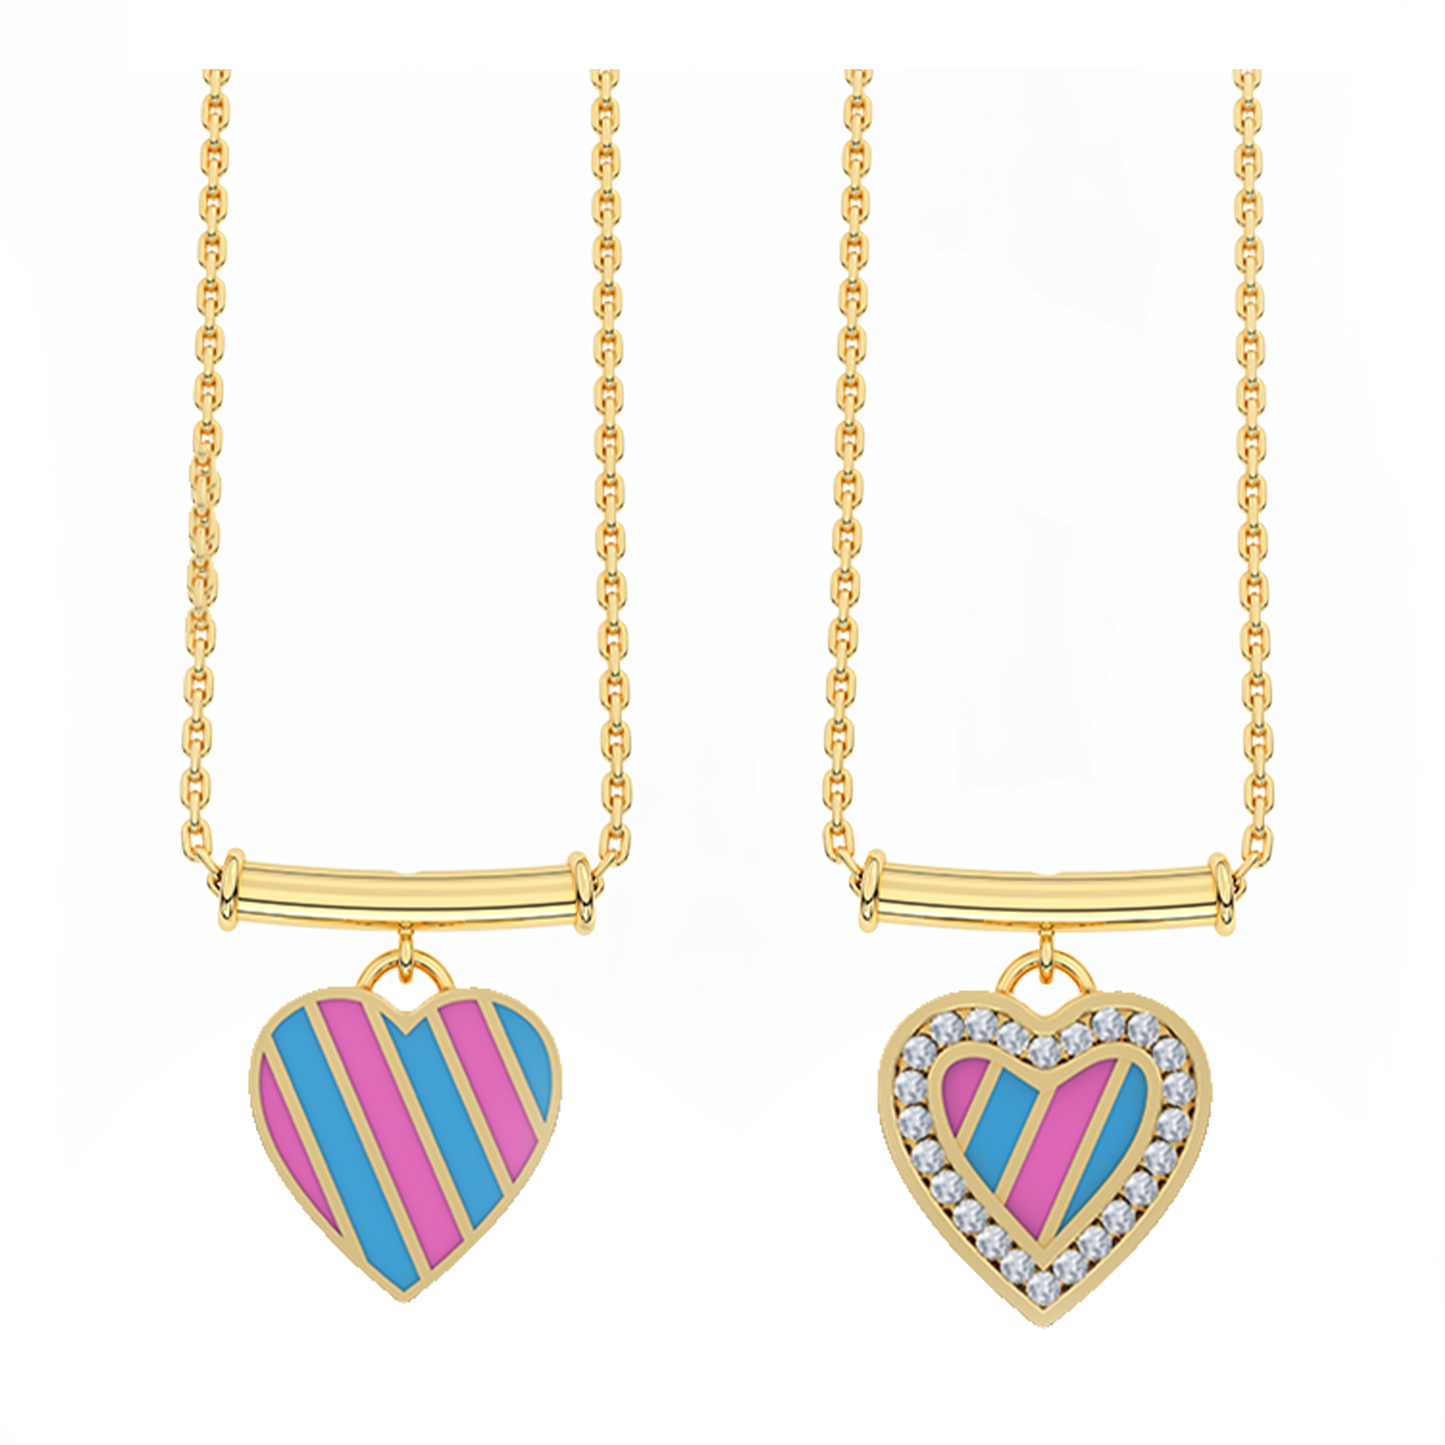 Candy Crush necklace